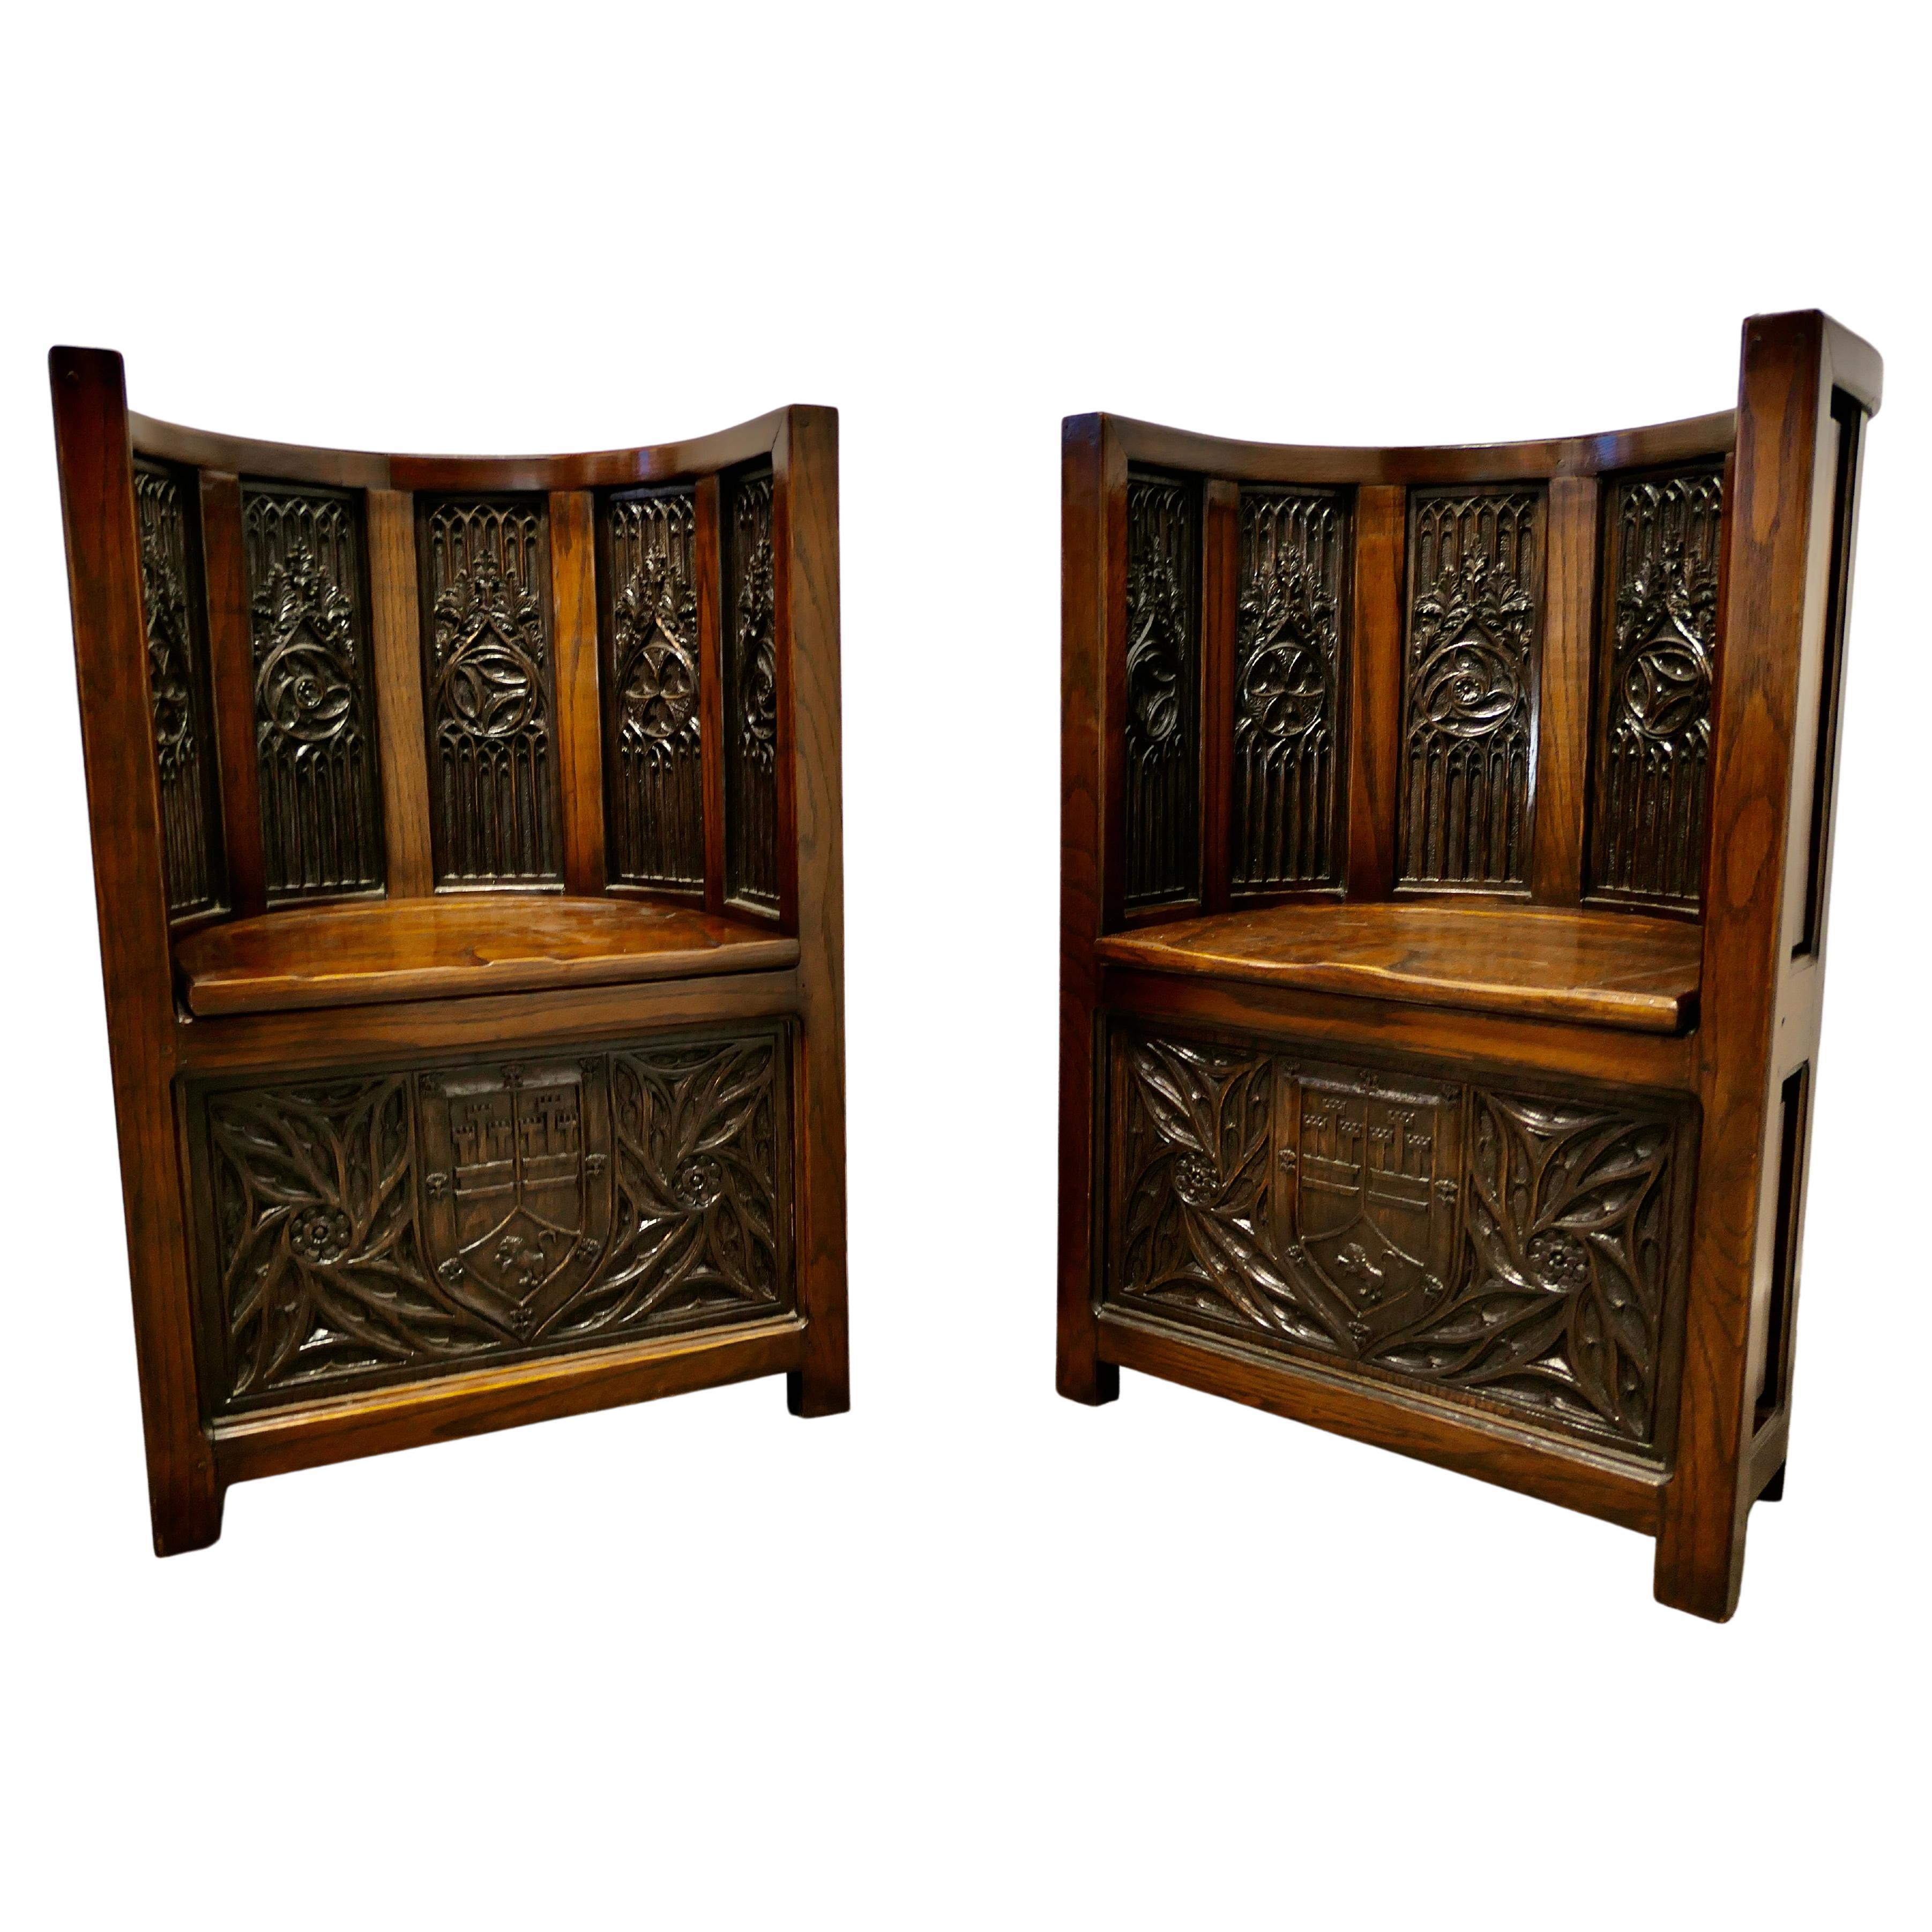 Pugin Inspired Arts and Crafts Carved Barrel Back Hall Chairs